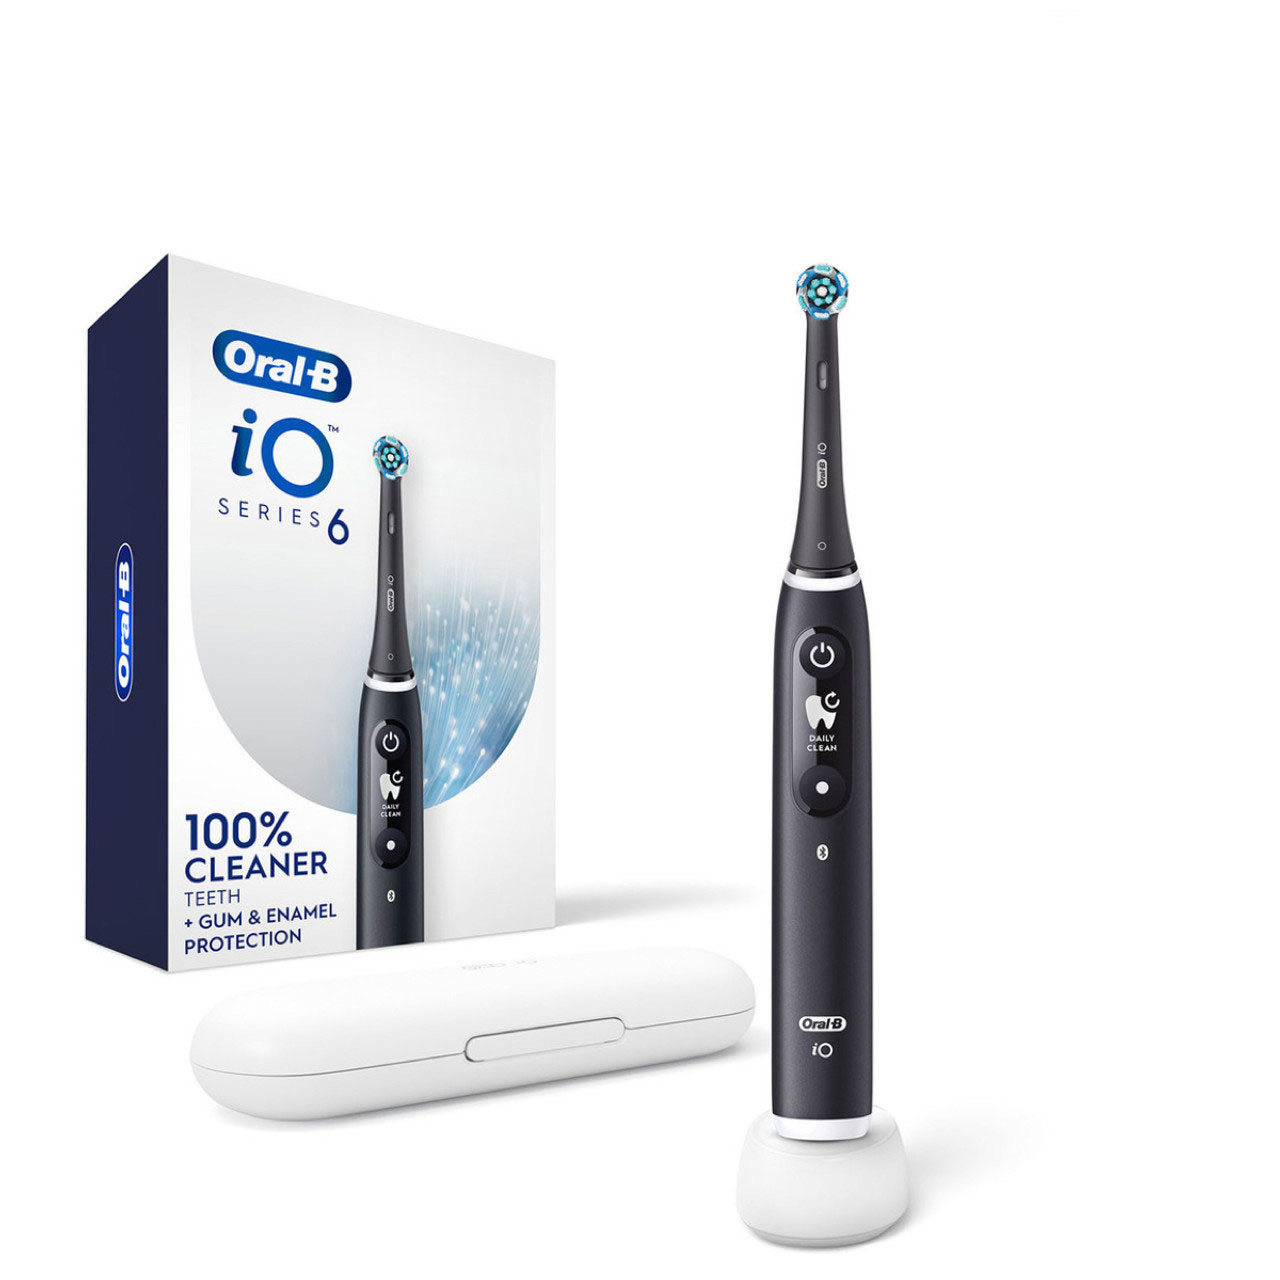 Oral-B Power Brush with case and box